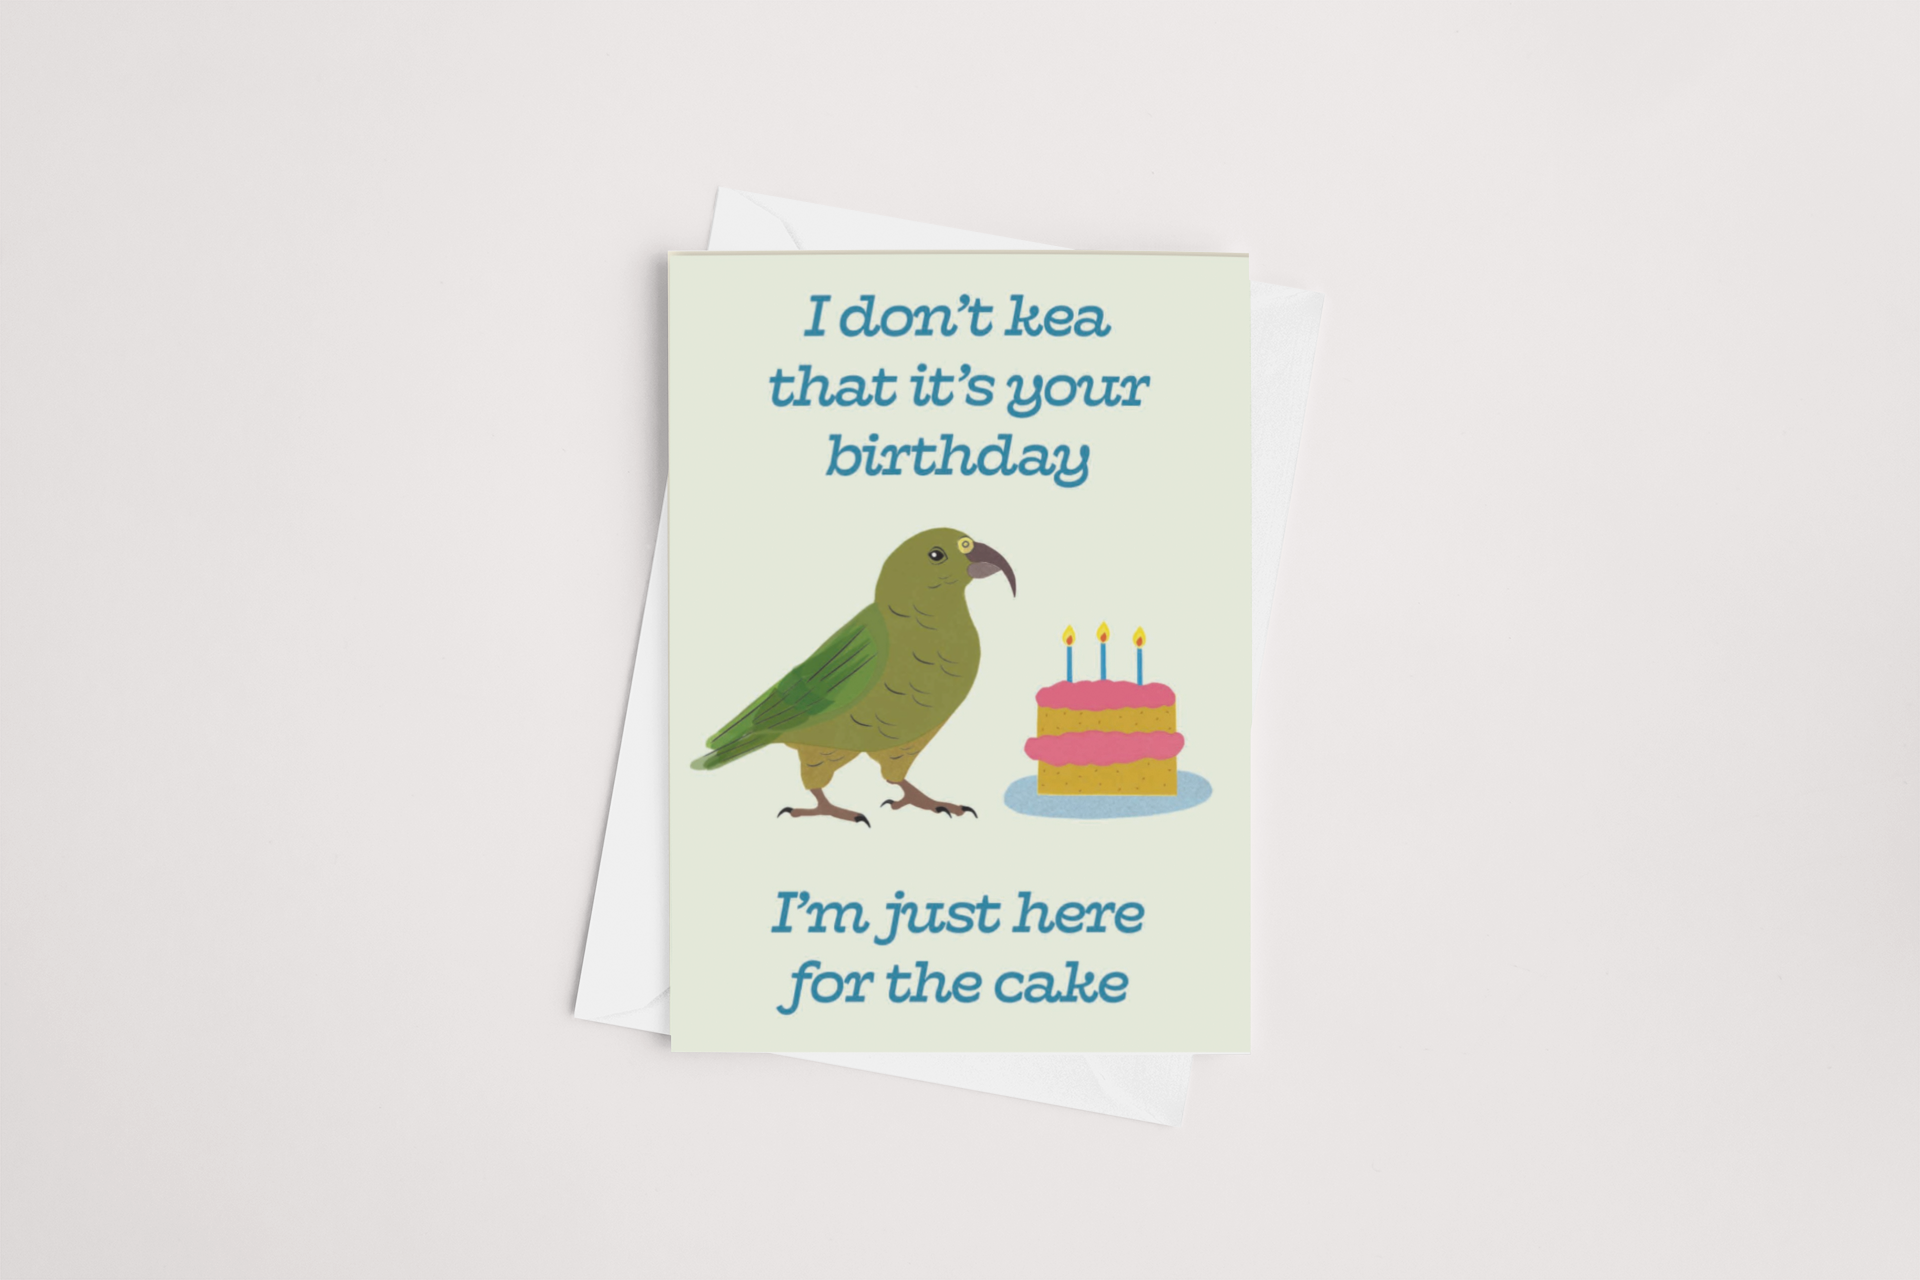 A Kea Birthday Card featuring an illustration of a parrot next to a cake with the humorous caption, "I don't 'kea that it's your birthday. I'm just here for the cake," by Tuesday Print.